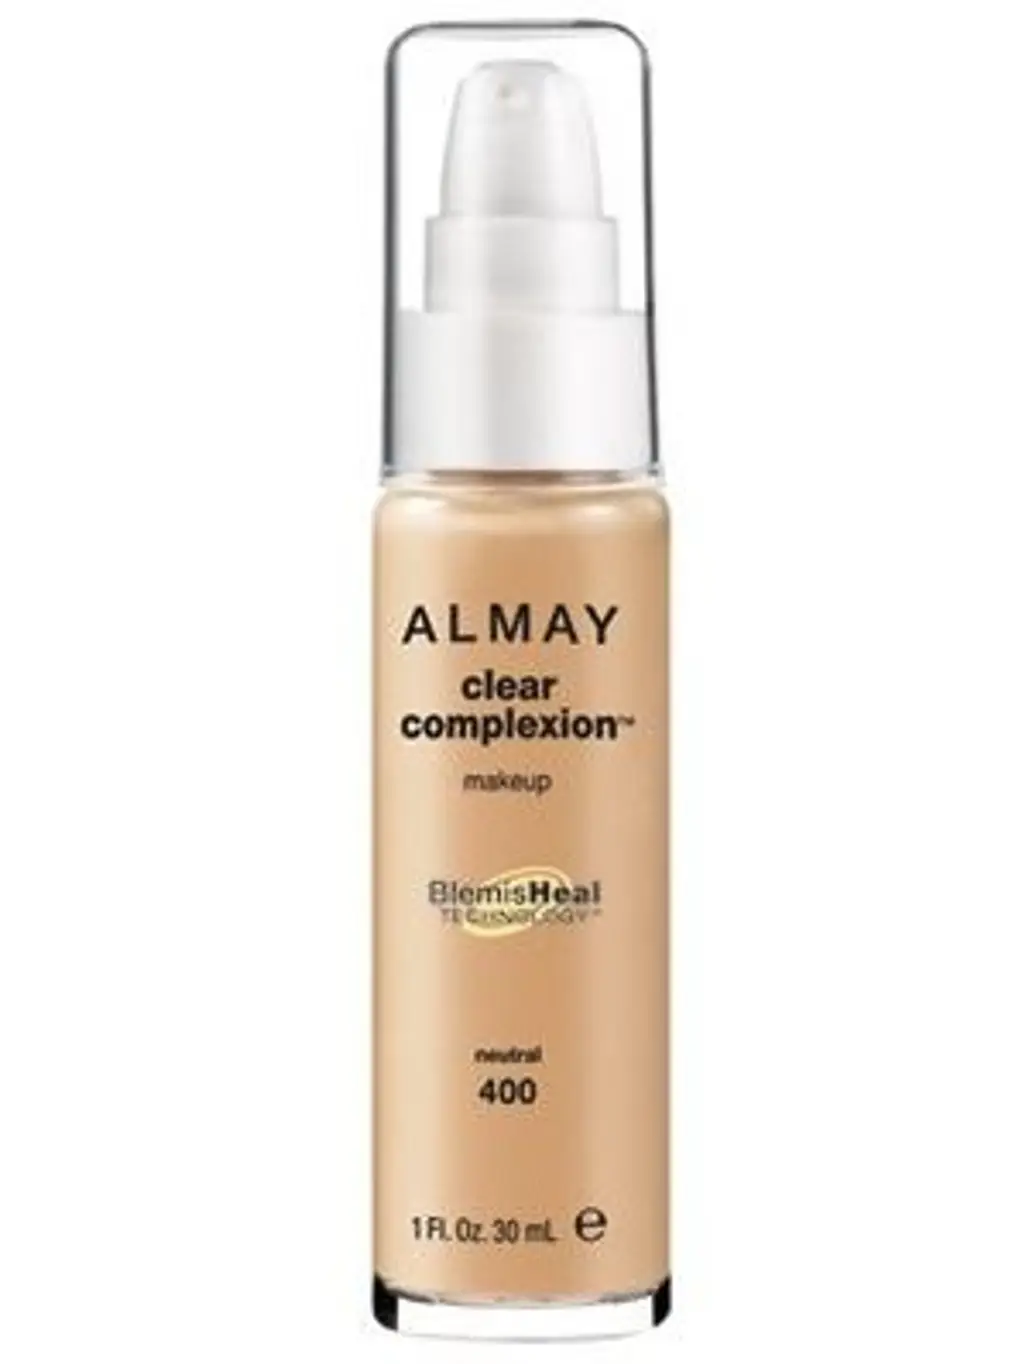 Clear Complexion Makeup BlemisHeal Technology